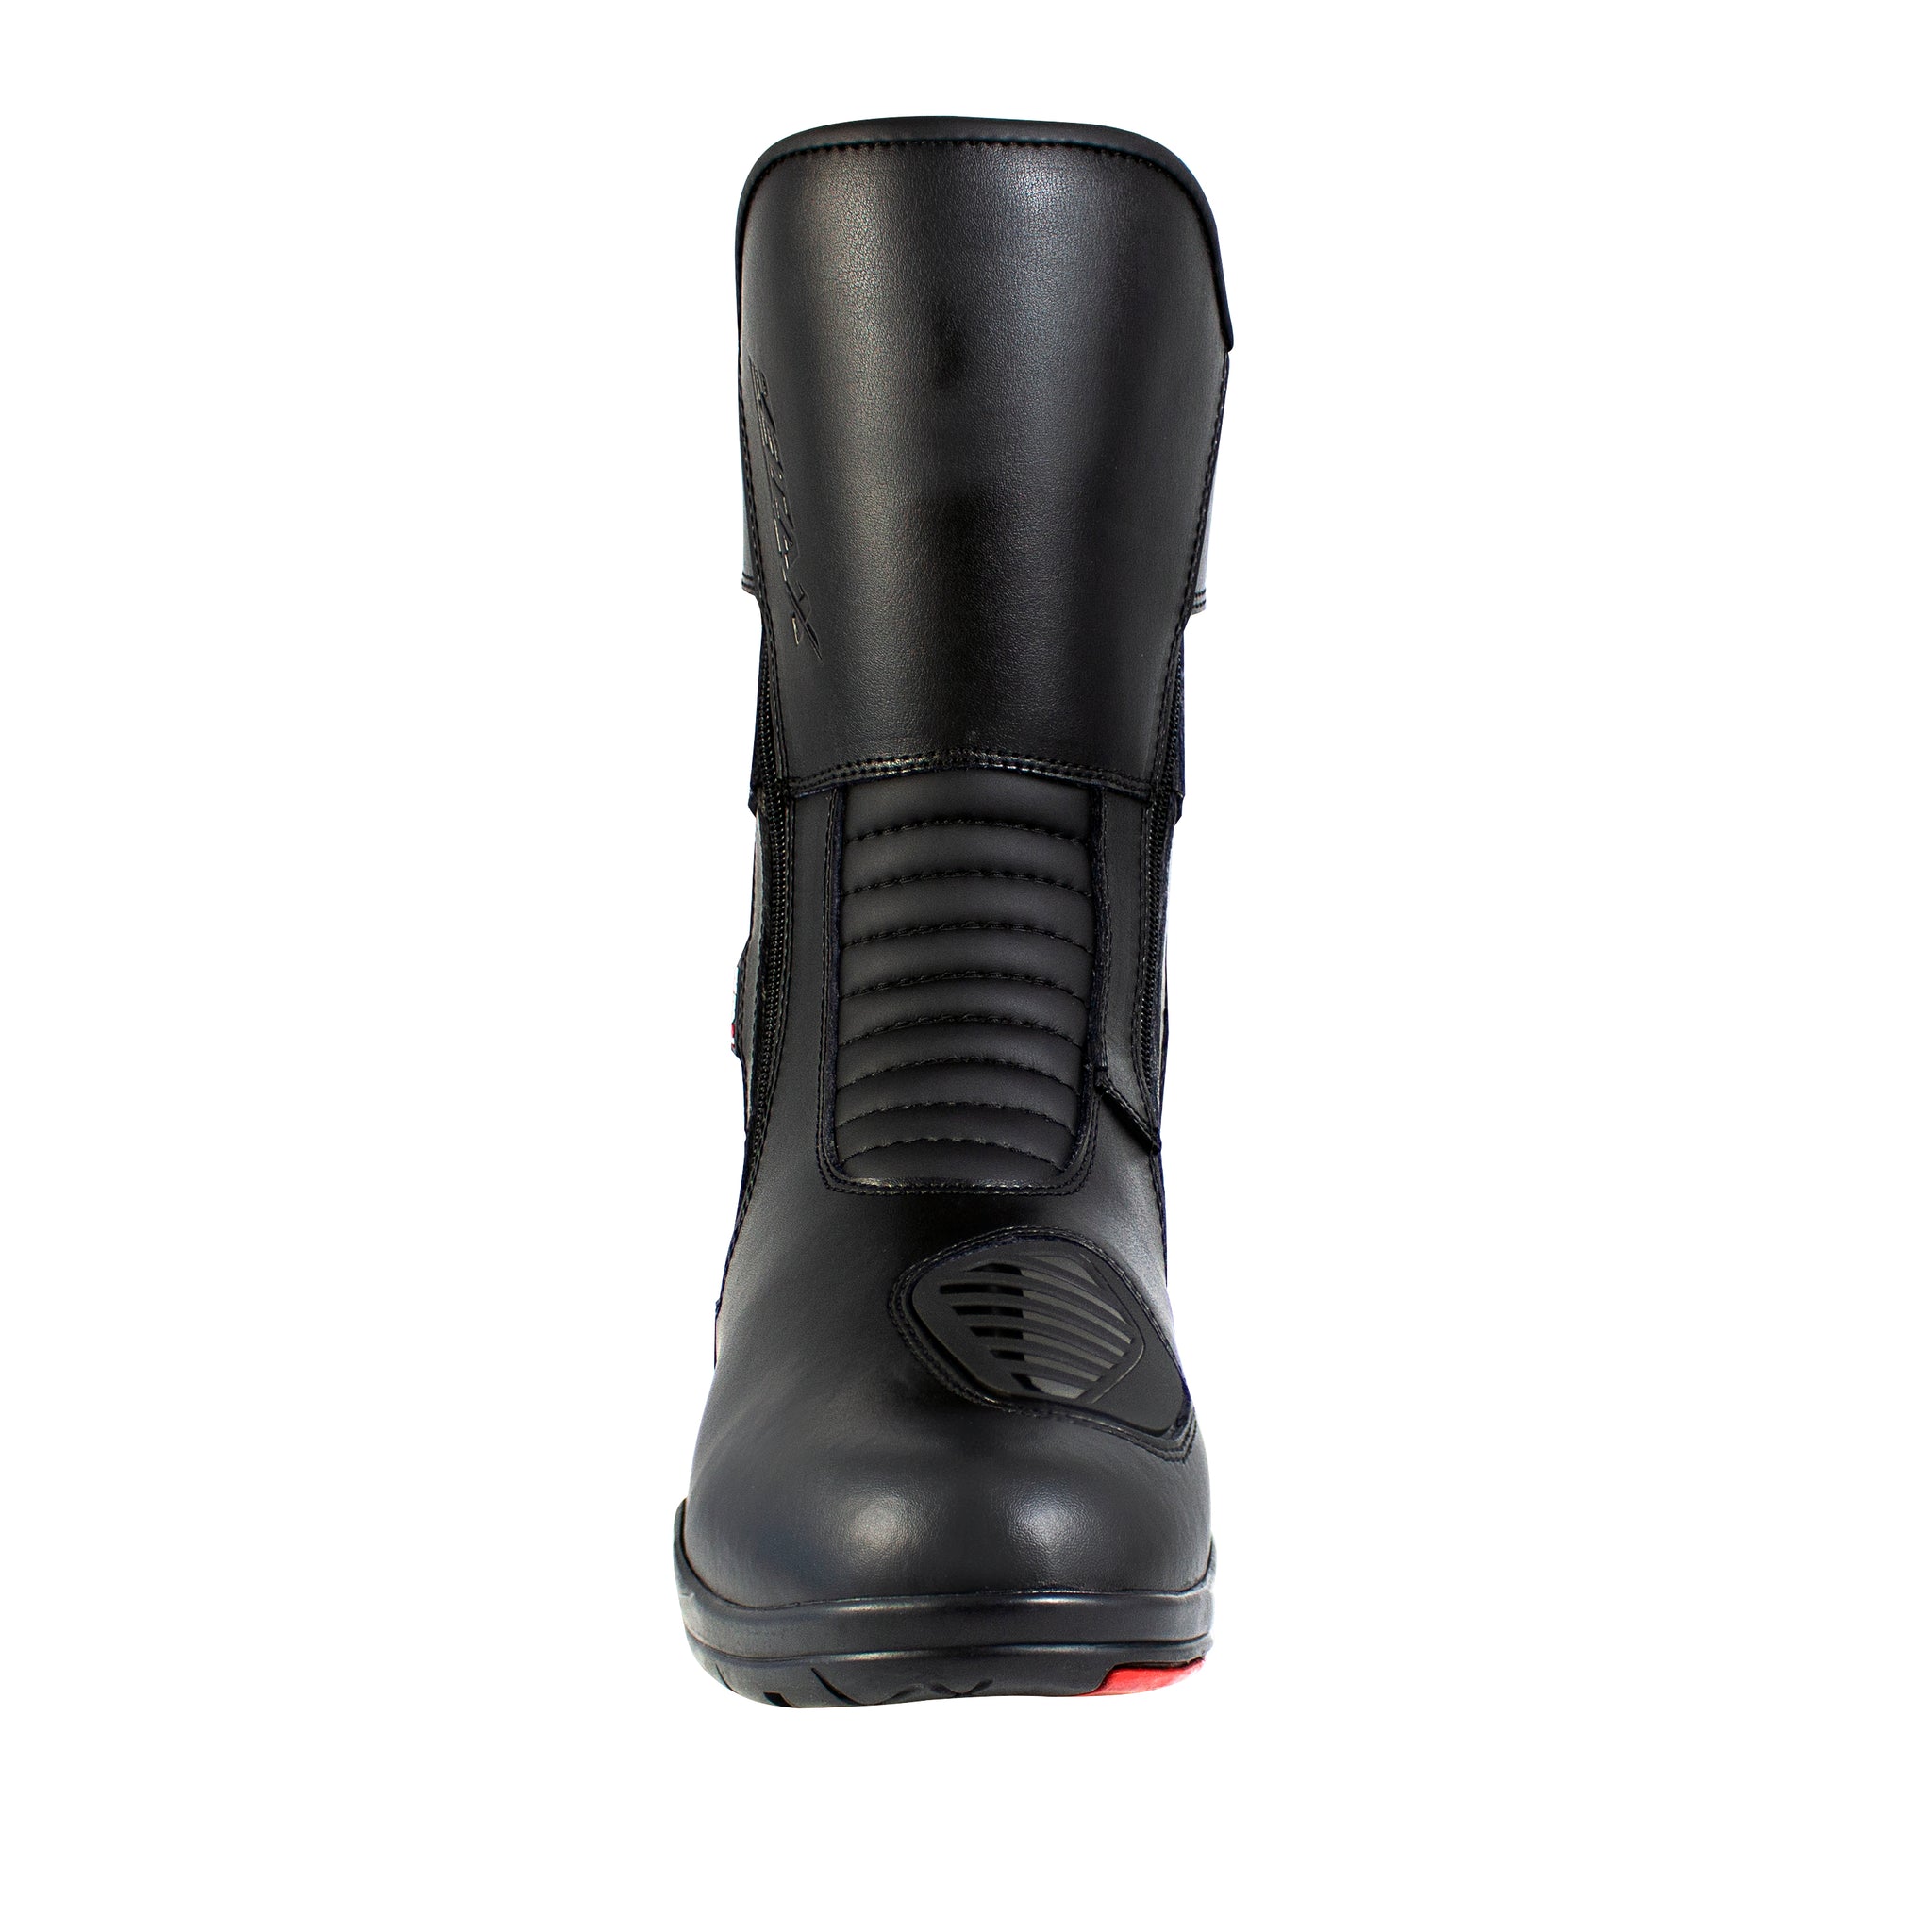 High Performance PU Coated Leather Touring Boot Waterproof with a 